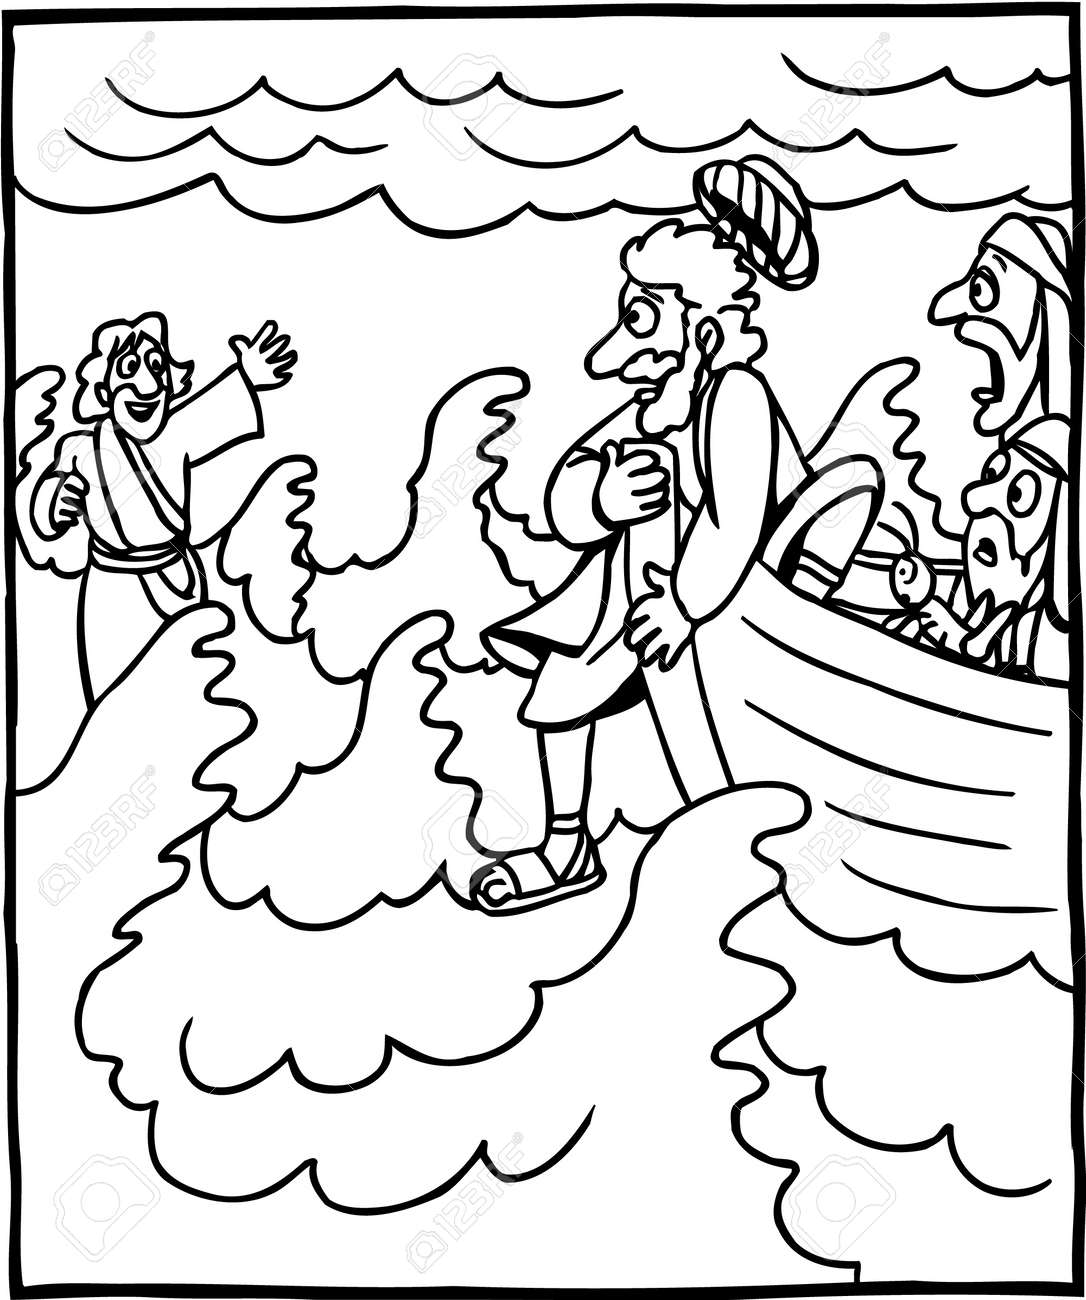 Coloring page of jesus and peter walking on water royalty free svg cliparts vectors and stock illustration image